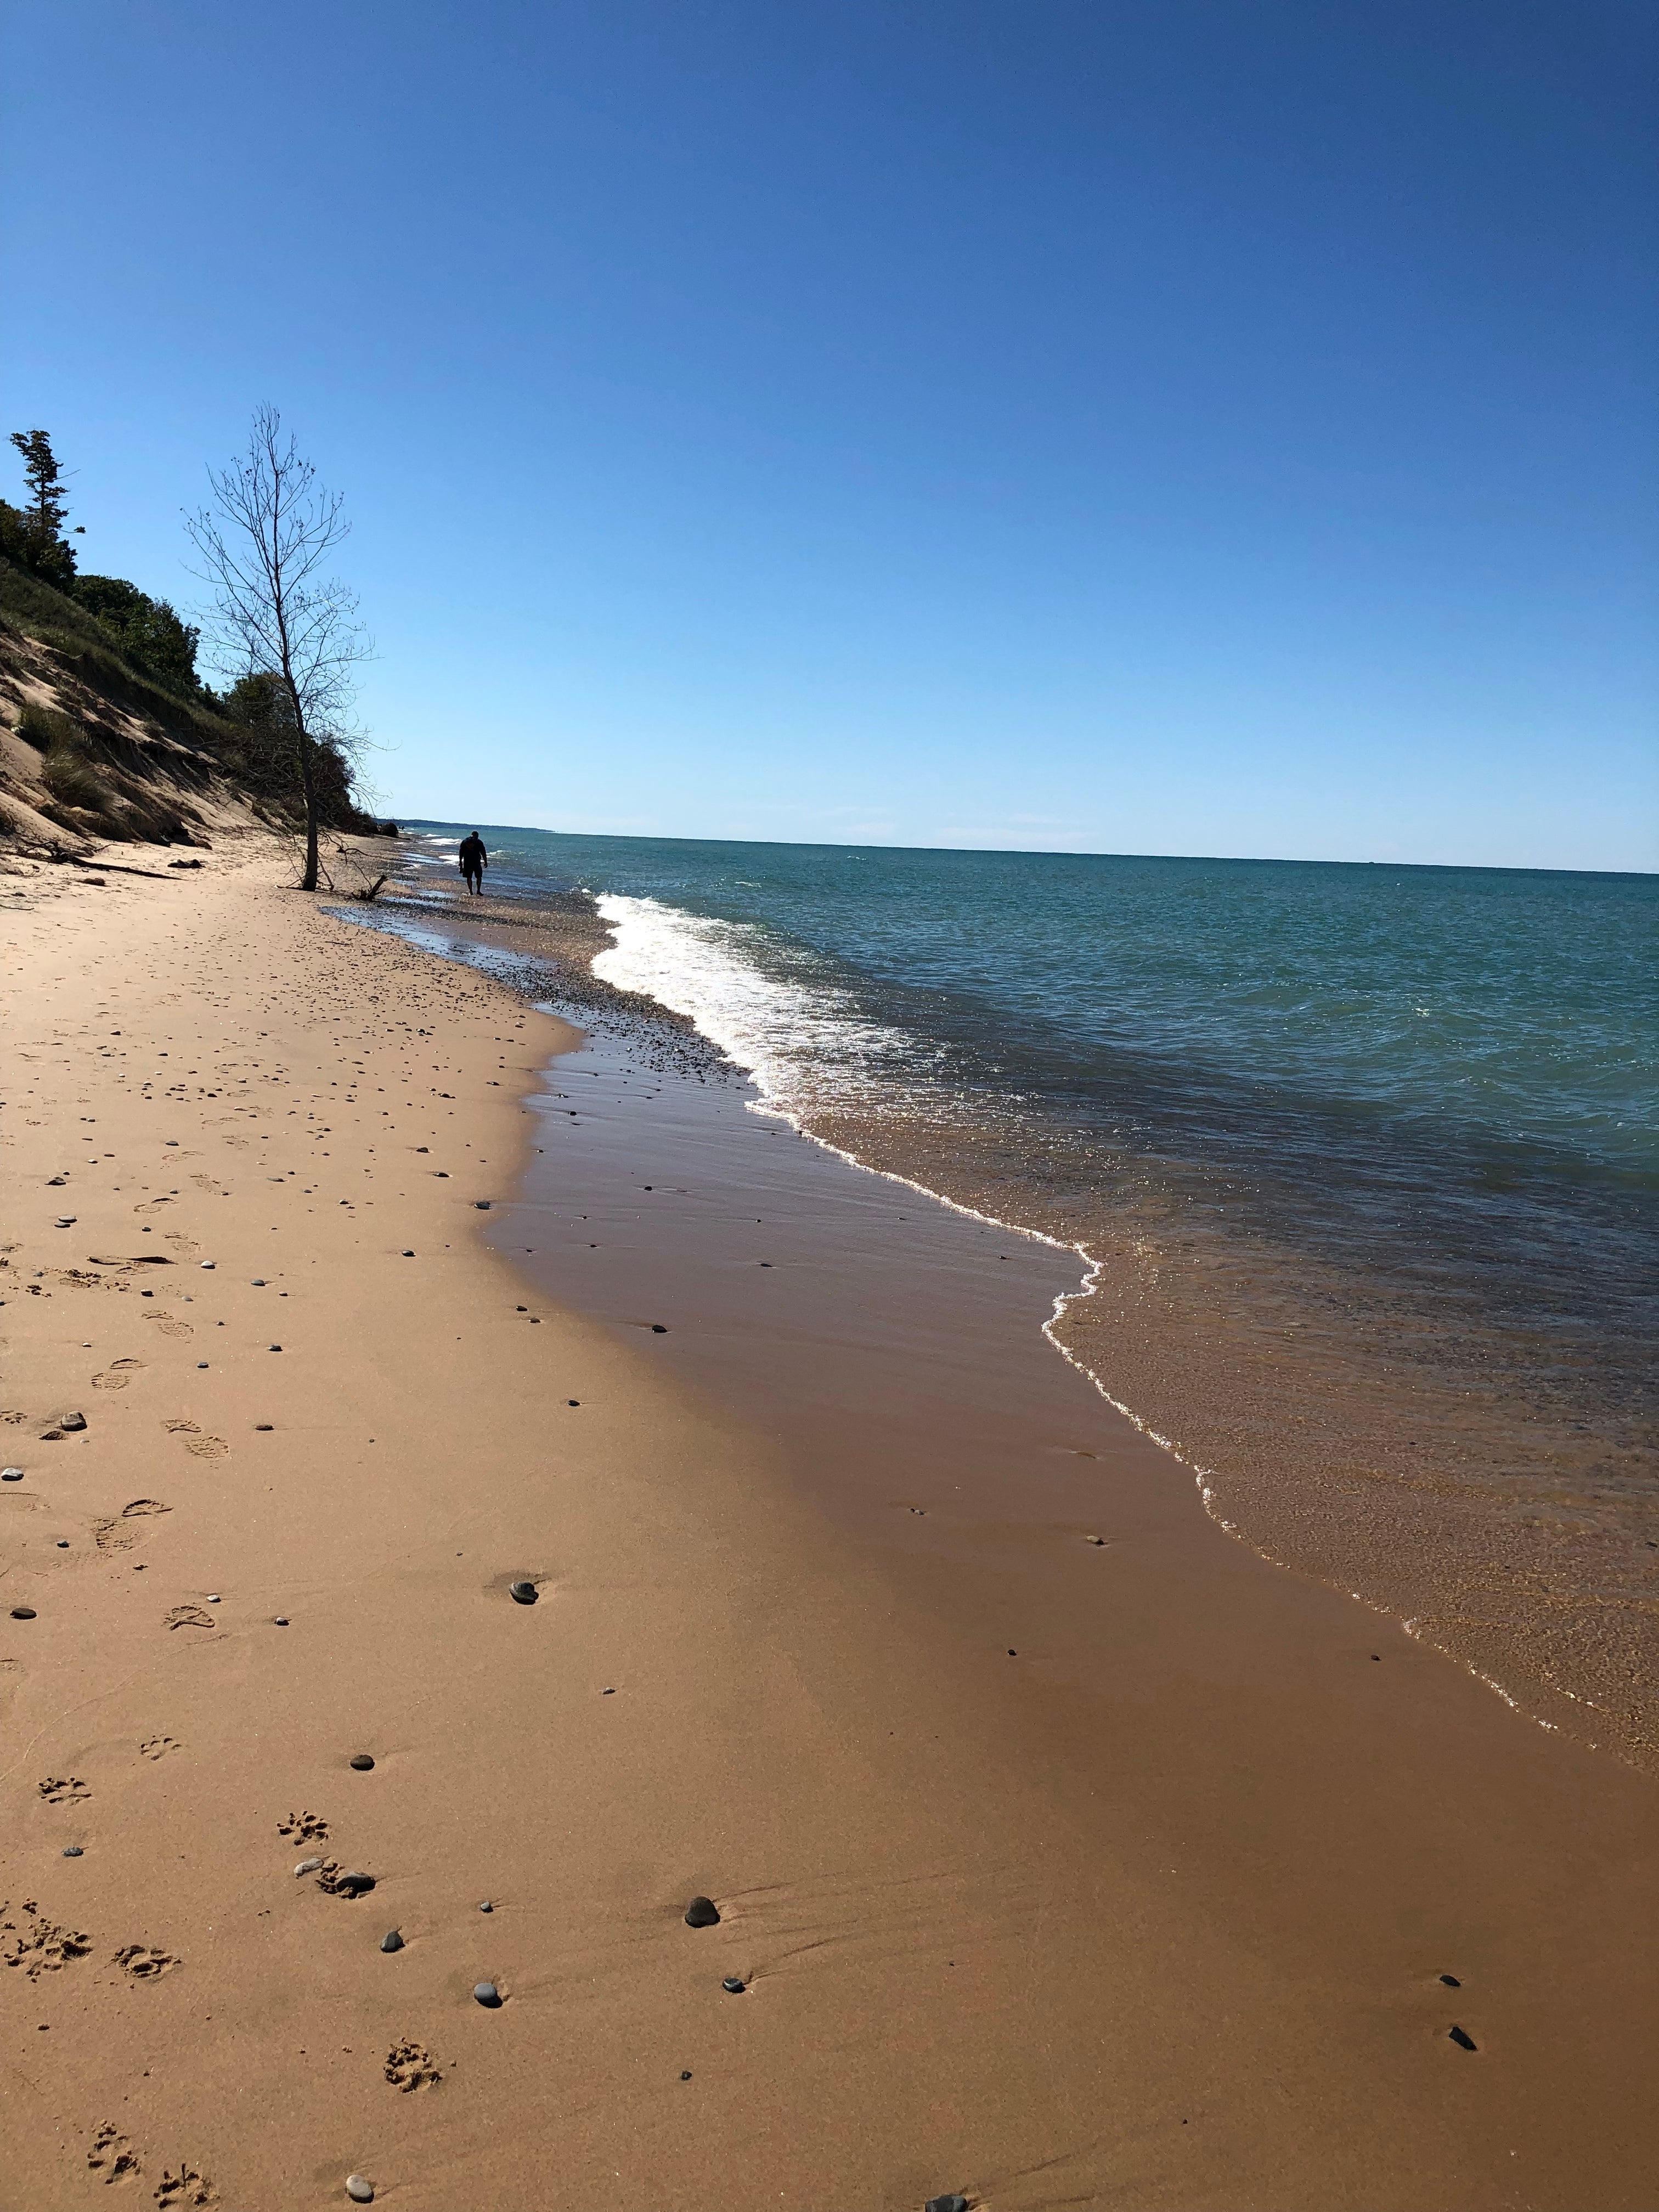 About a mile to hike to the shores of Lake Michigan. 